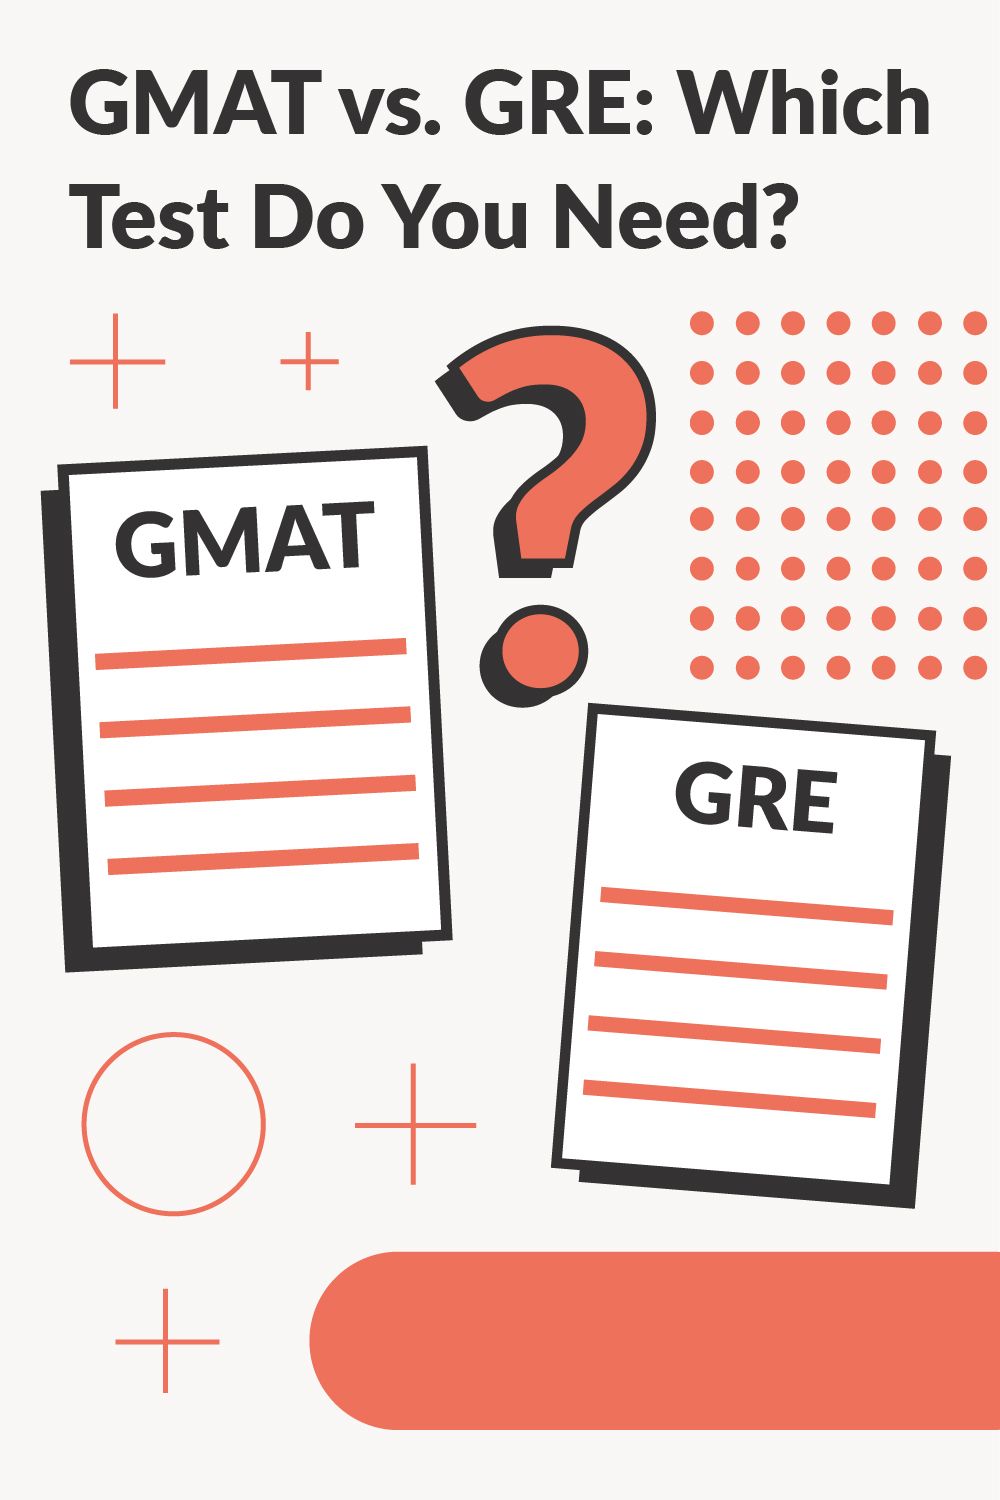 GMAT vs. GRE: Which Test Do You Need?